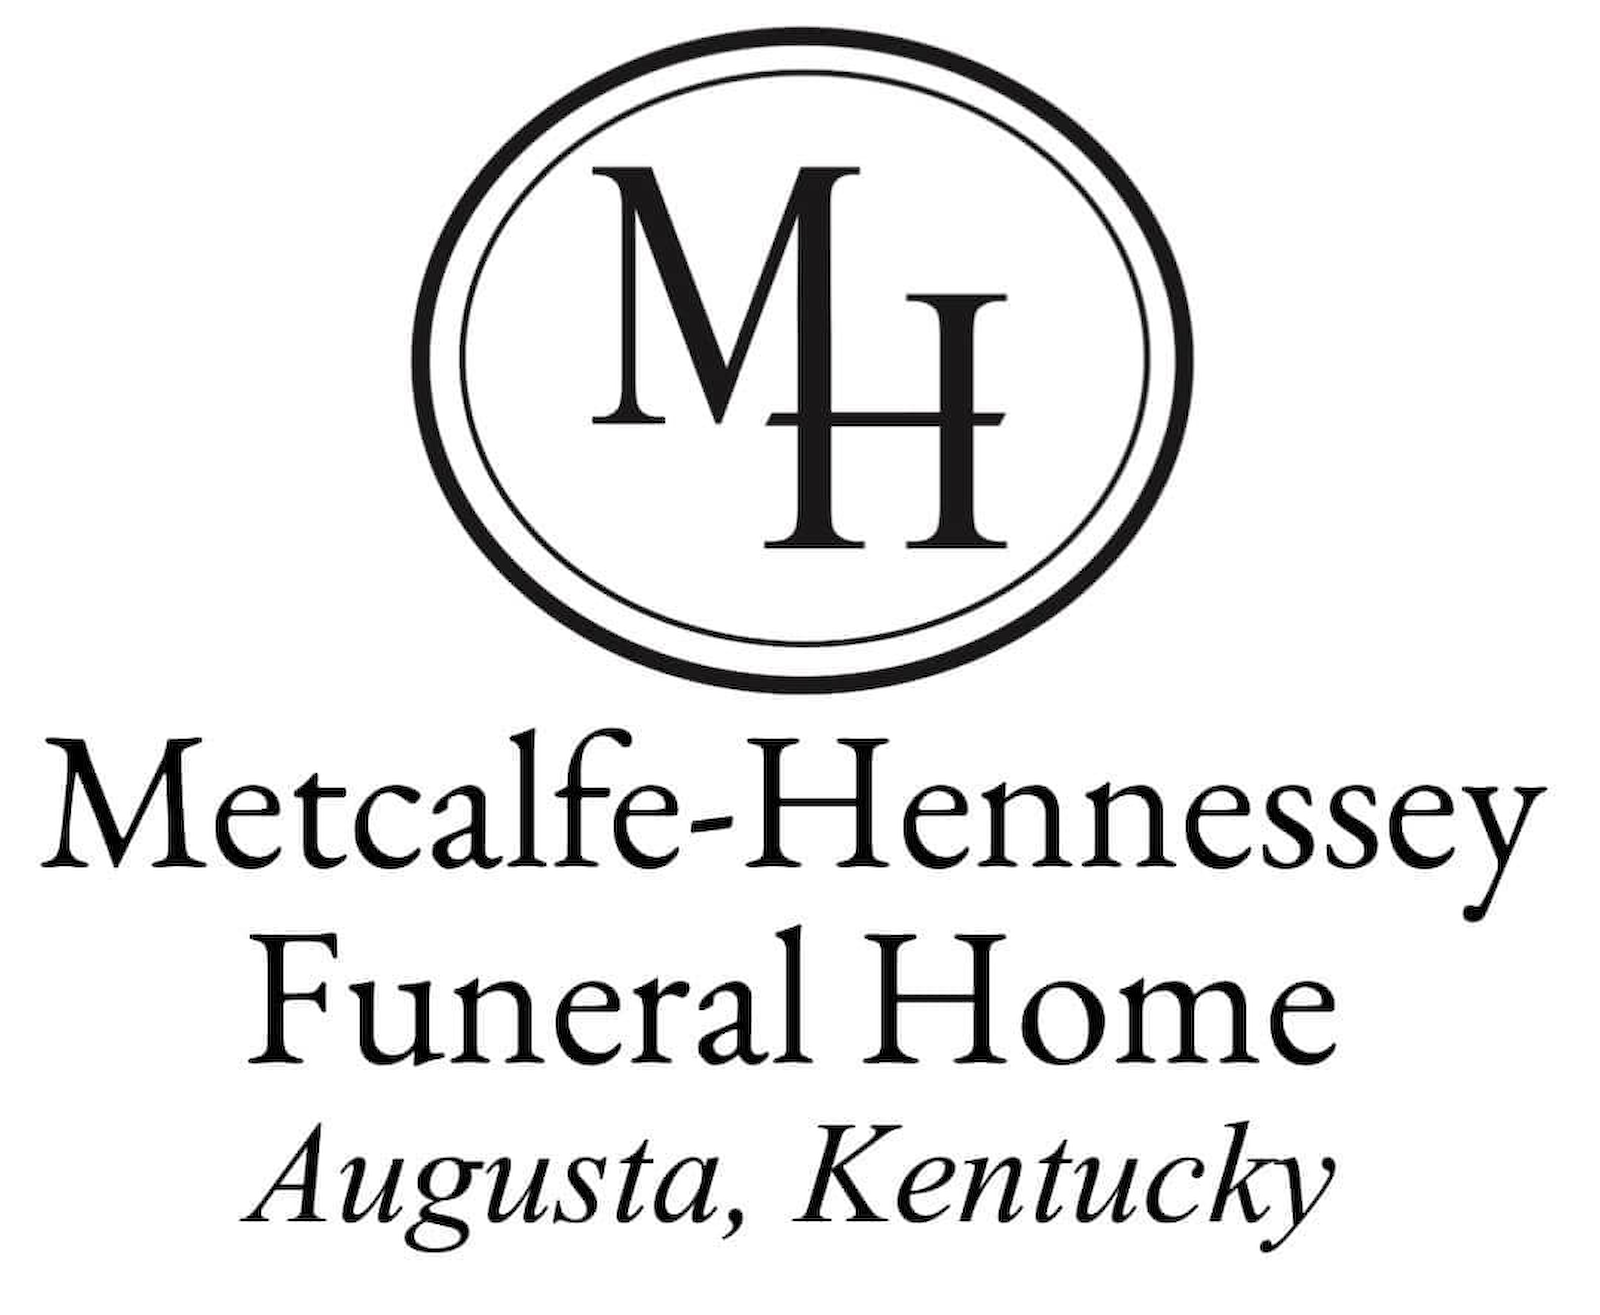 Metcalfe-Hennessey Funeral Home